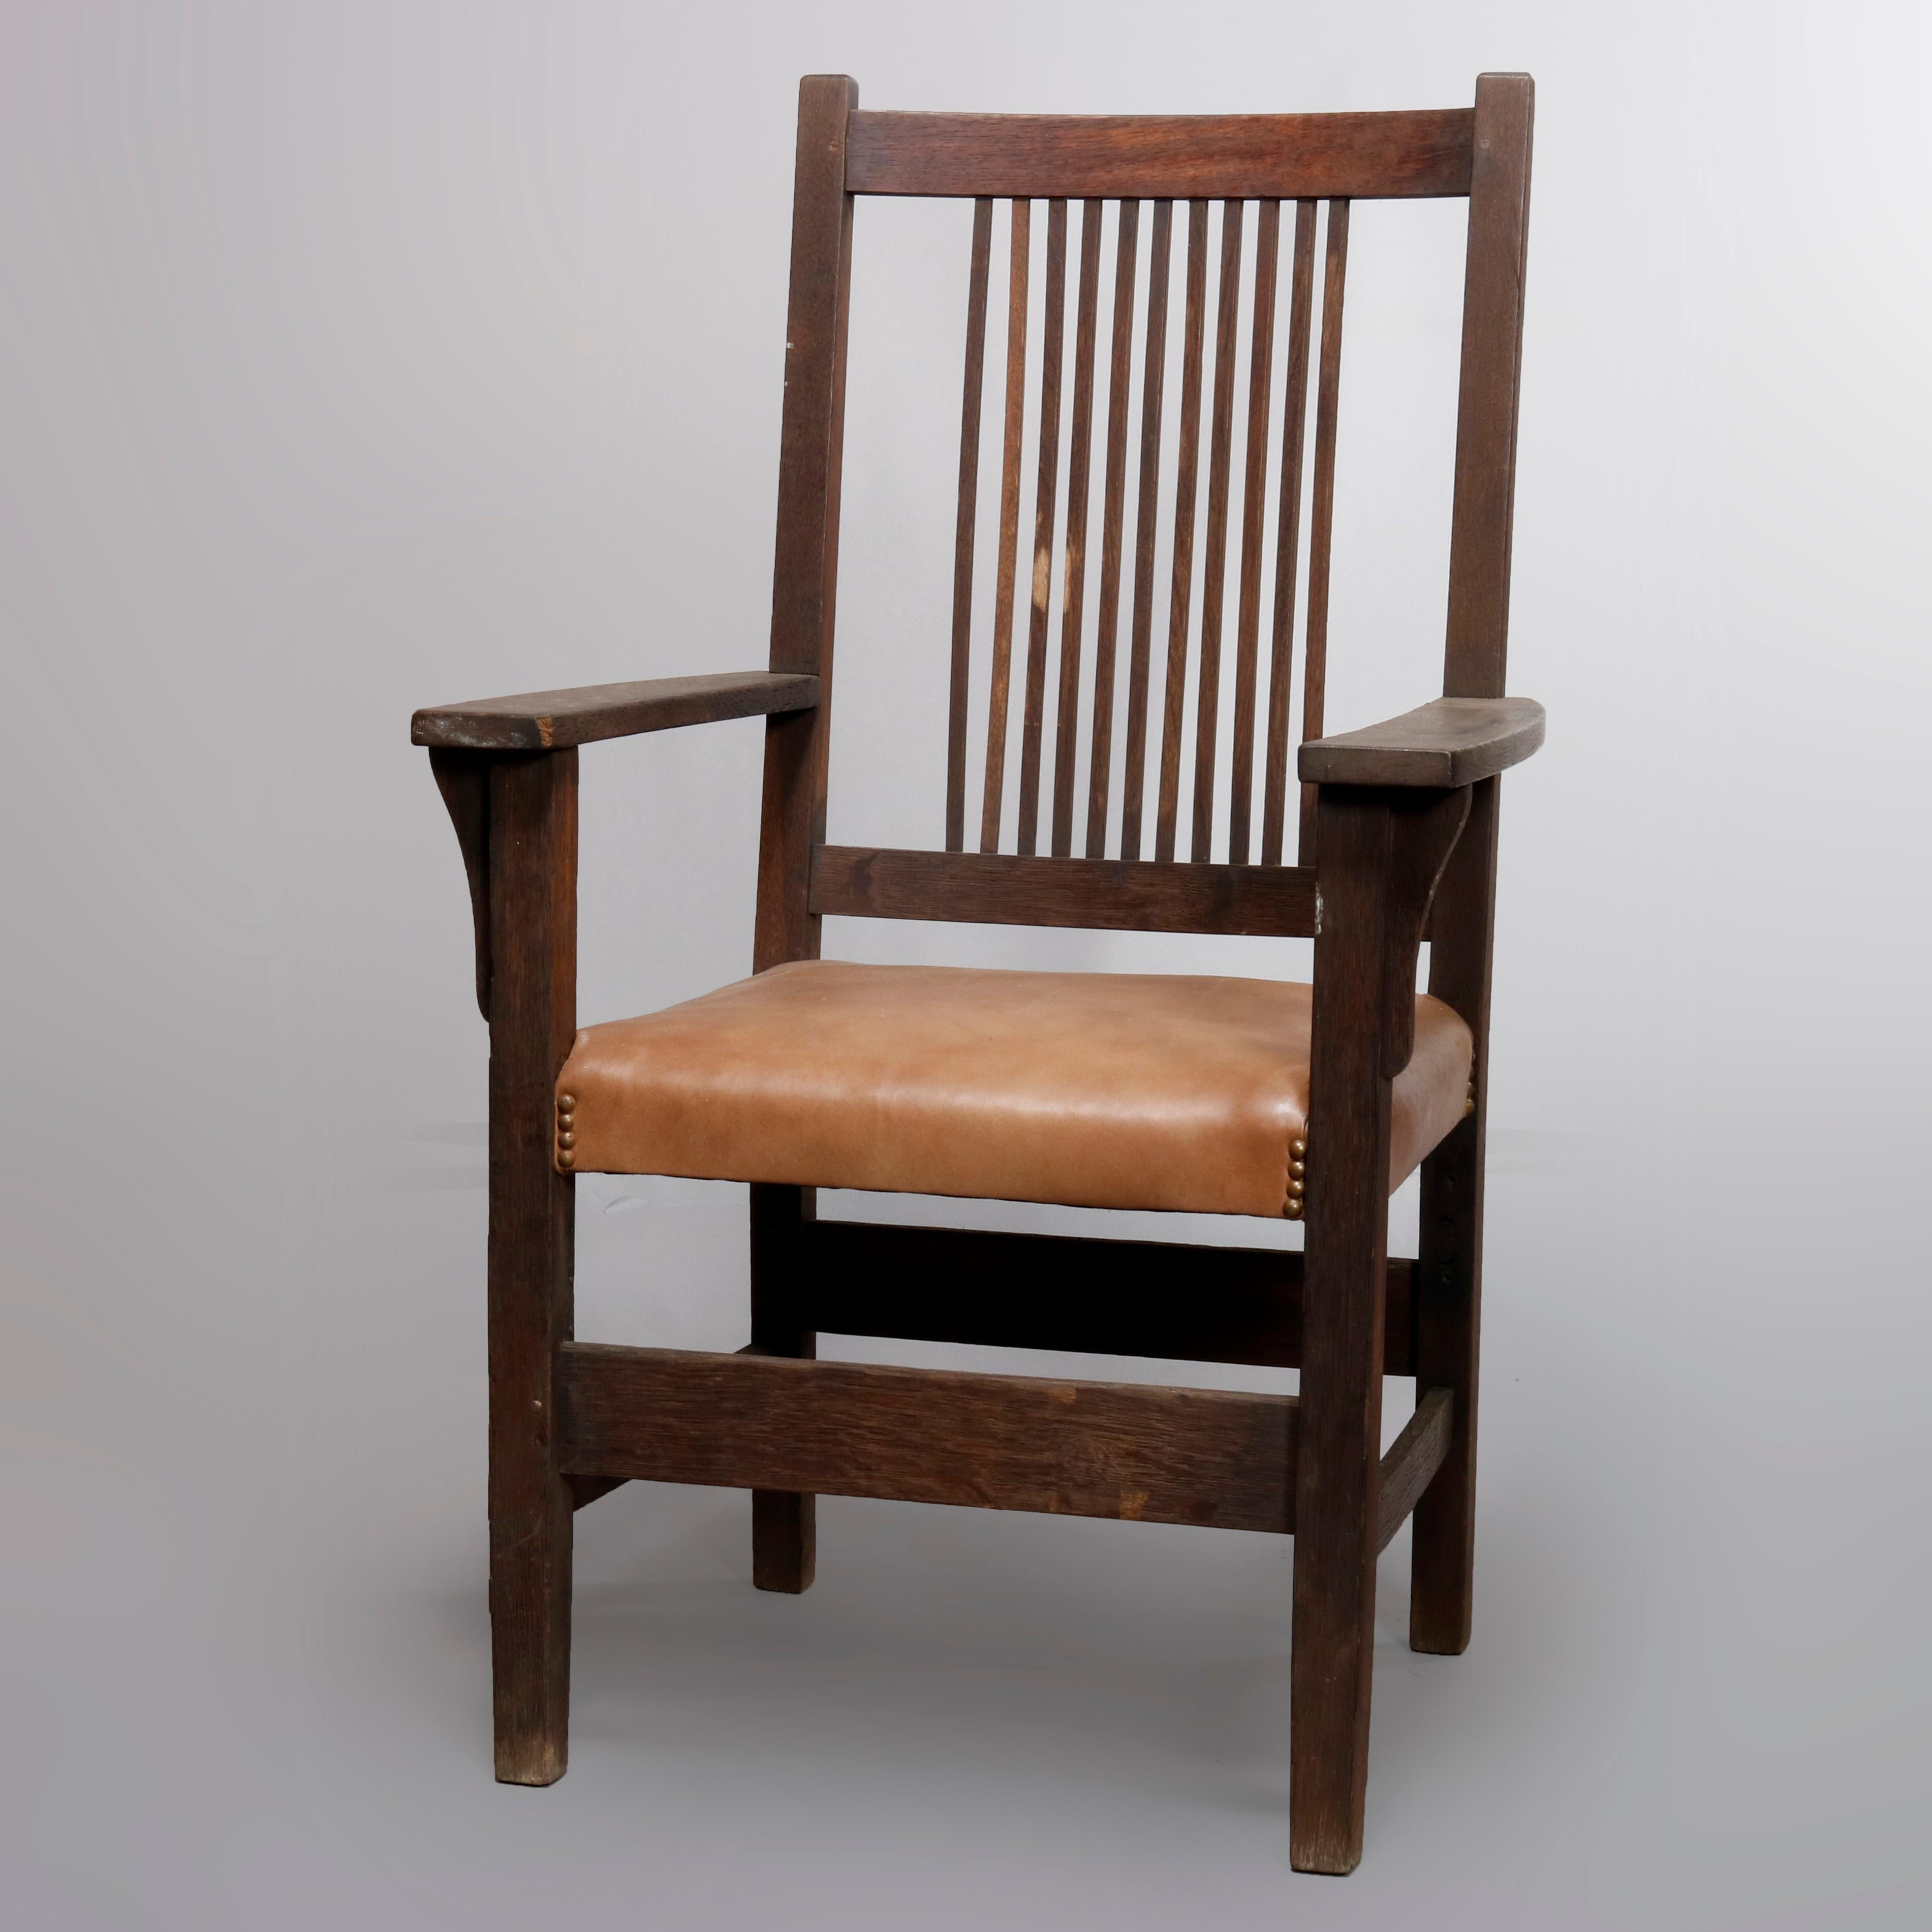 An Arts & Crafts Mission Oak L and J G Stickley armchair offers spindle back surmounting even armed seat raised on square and straight legs, circa 1910.

Measures: 43